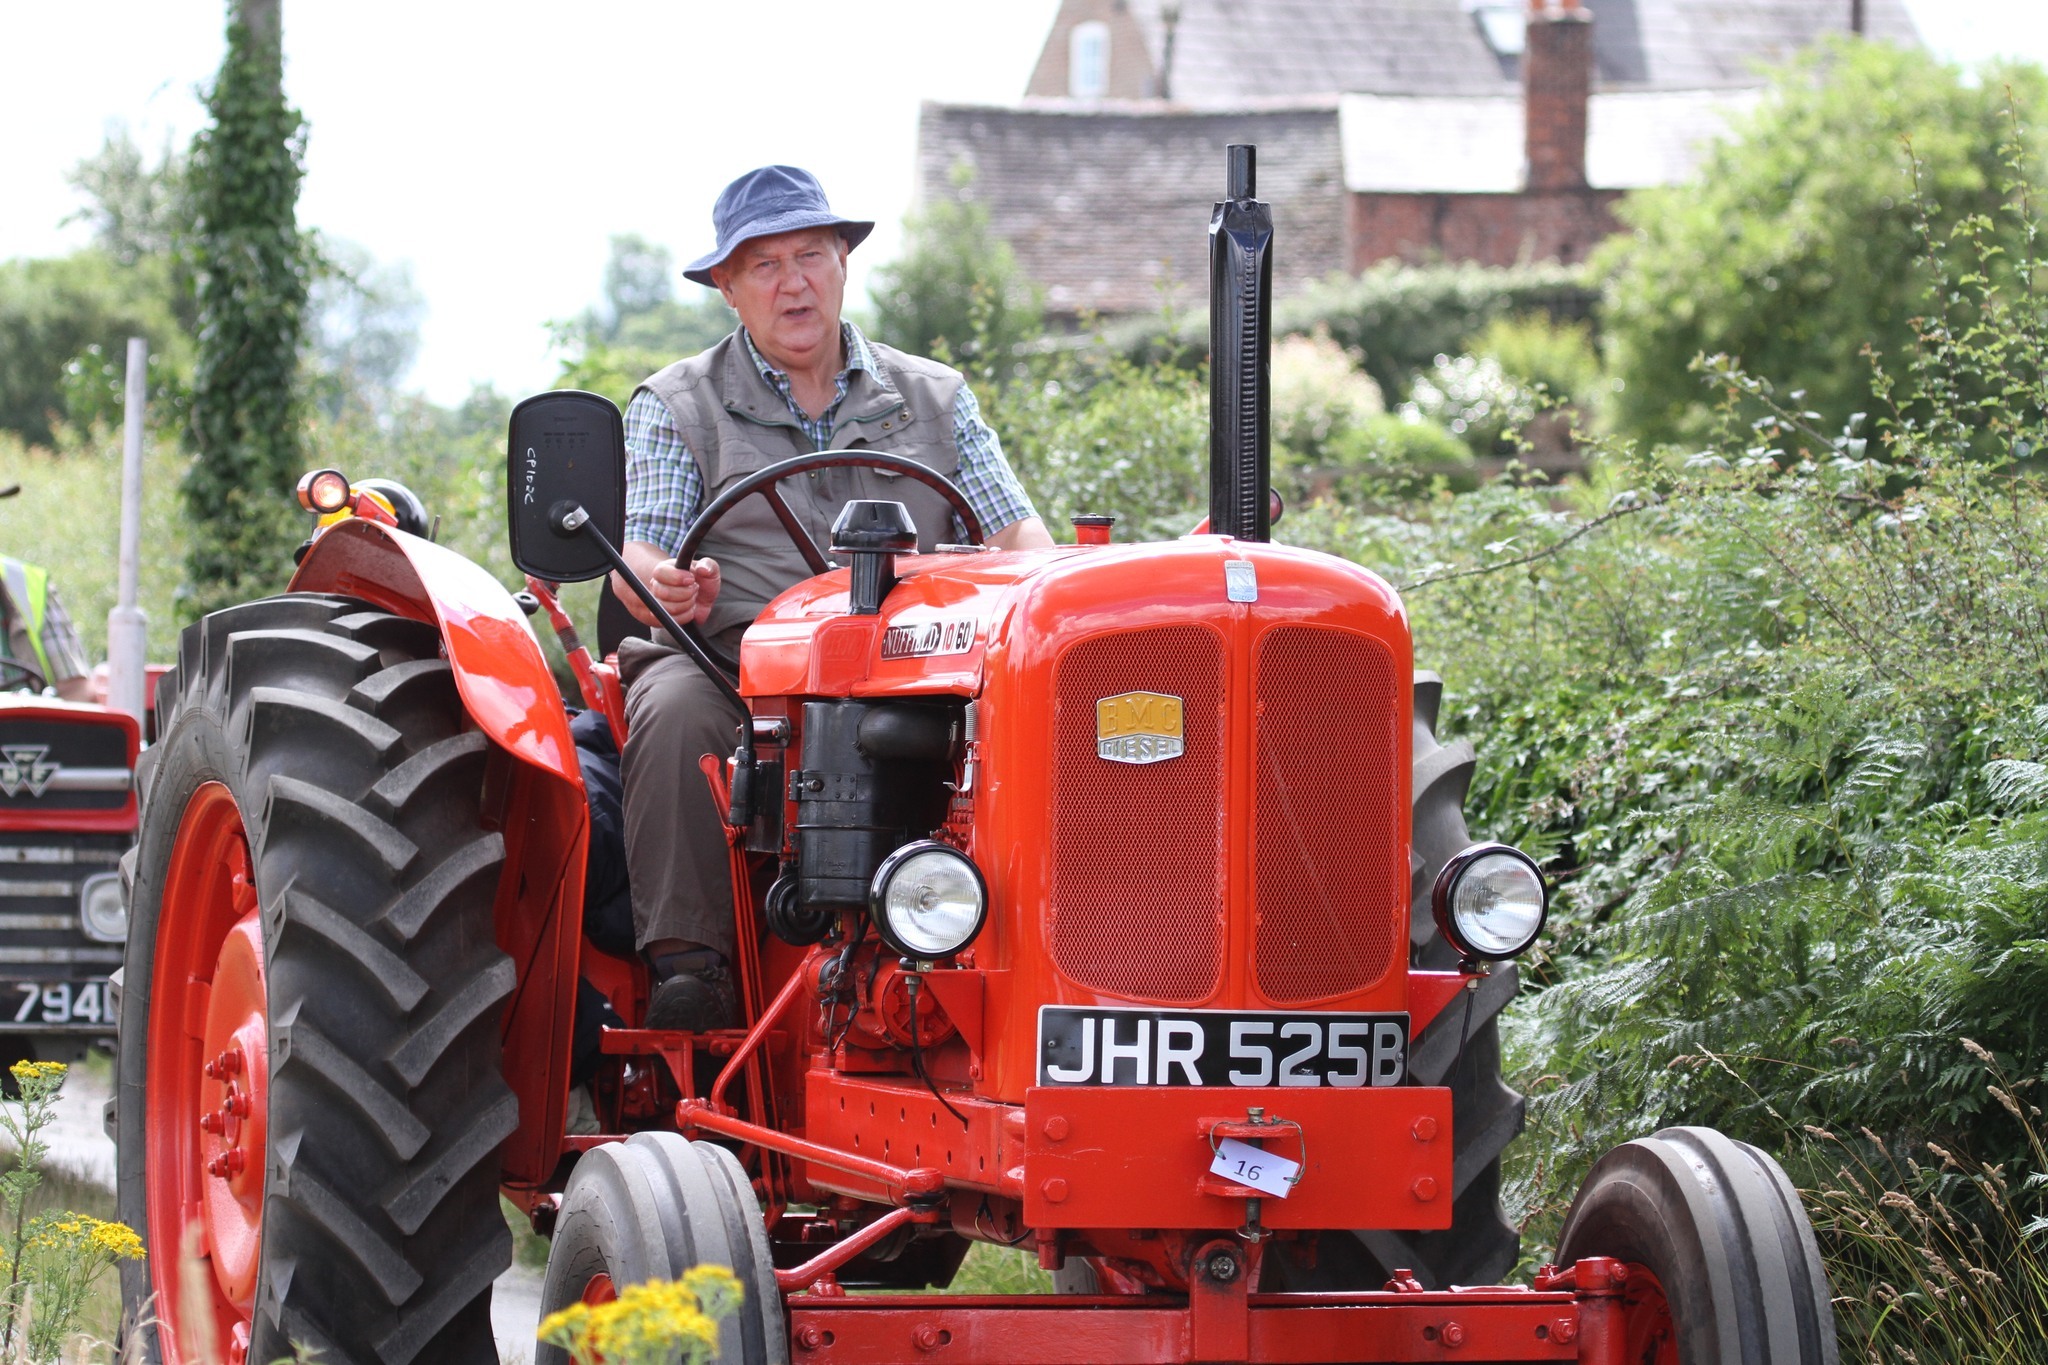 Tractor parade from Dairy House Farm in Winsford by Heather Wilde